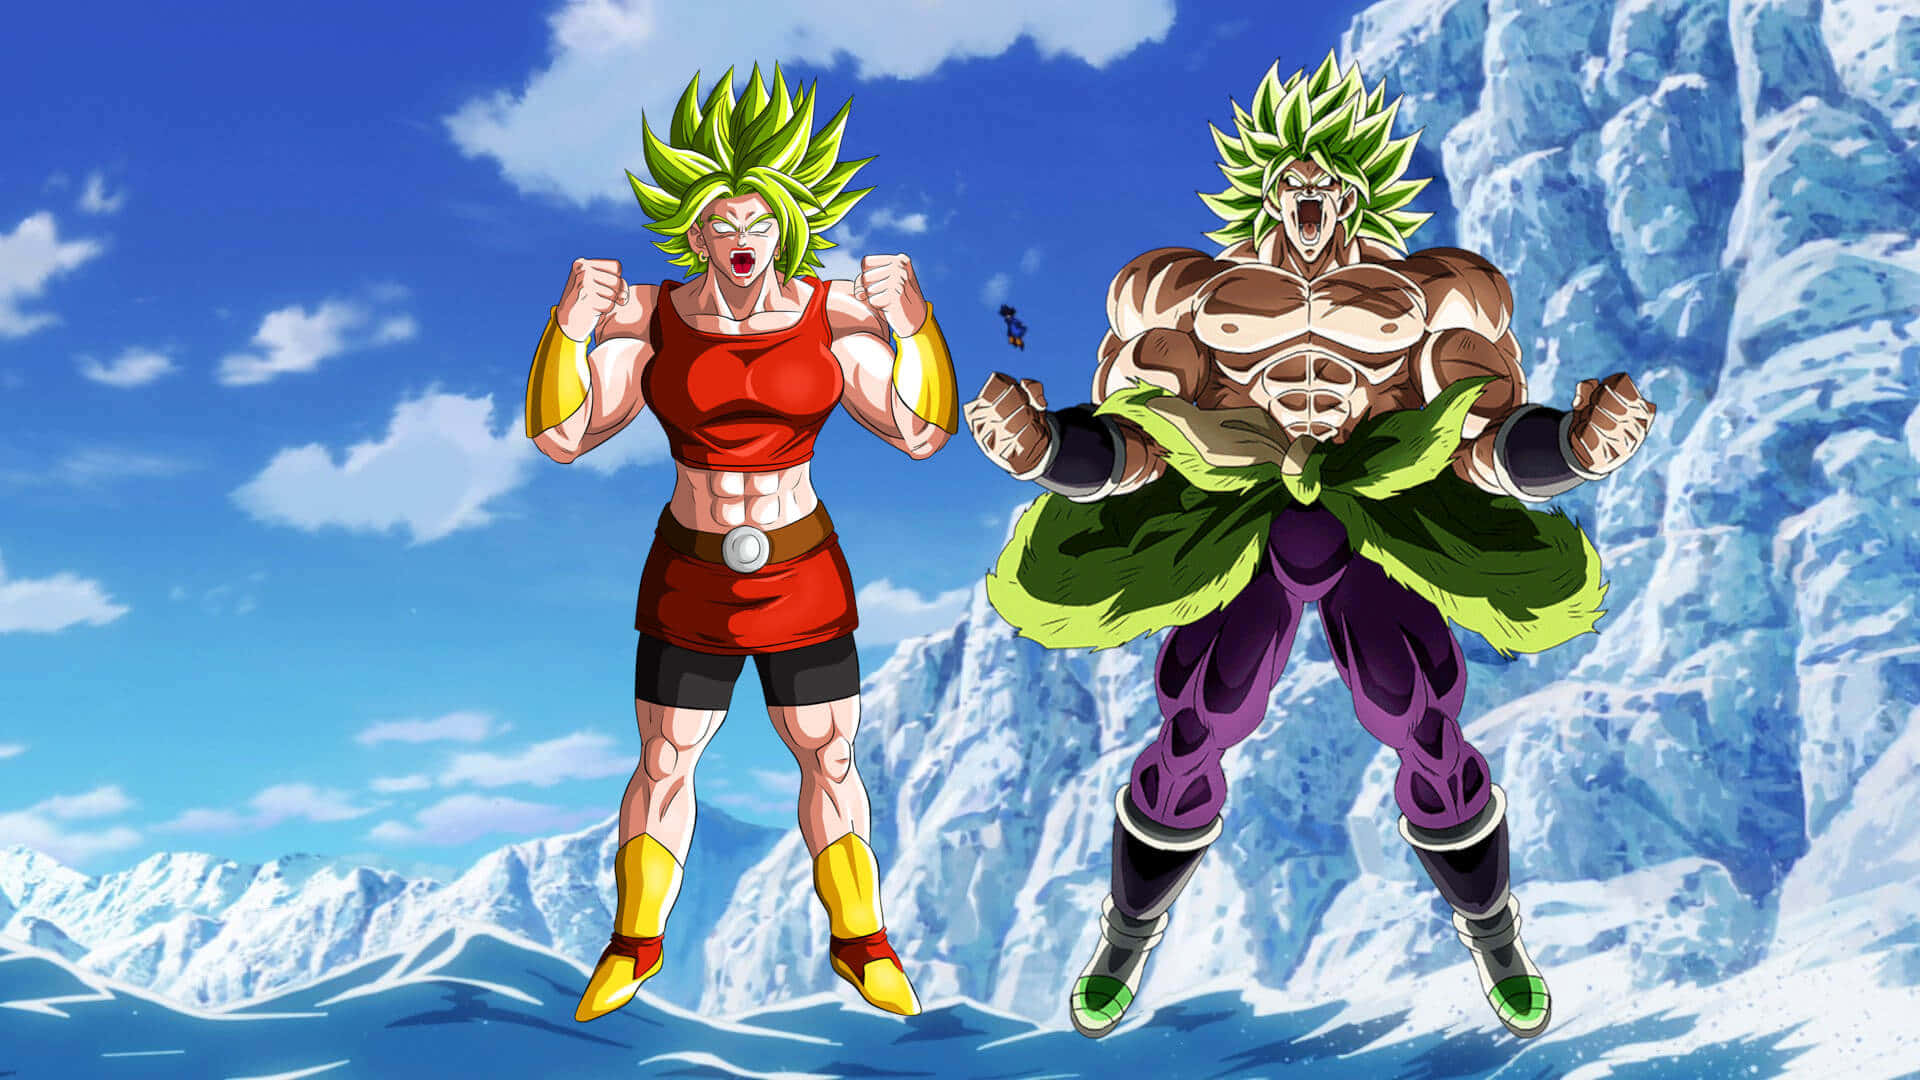 An action-packed anime adventure starring the legendary warrior, Broly.